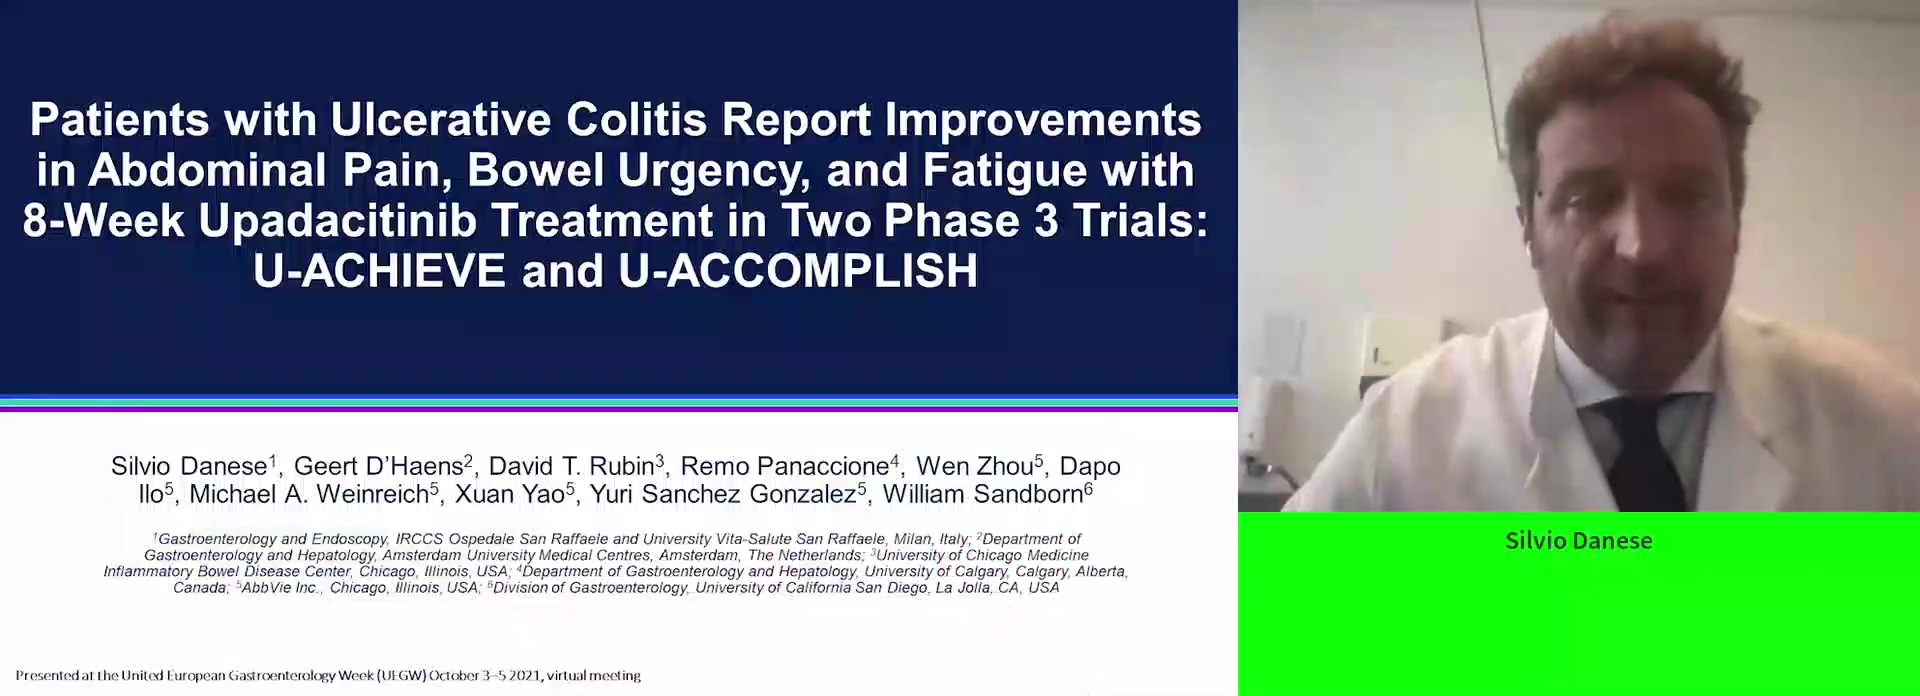 PATIENTS WITH ULCERATIVE COLITIS REPORT IMPROVEMENTS IN ABDOMINAL PAIN, BOWEL URGENCY, AND FATIGUE WITH 8-WEEK UPADACITINIB TREATMENT IN TWO PHASE 3 TRIALS: U-ACHIEVE AND U-ACCOMPLISH